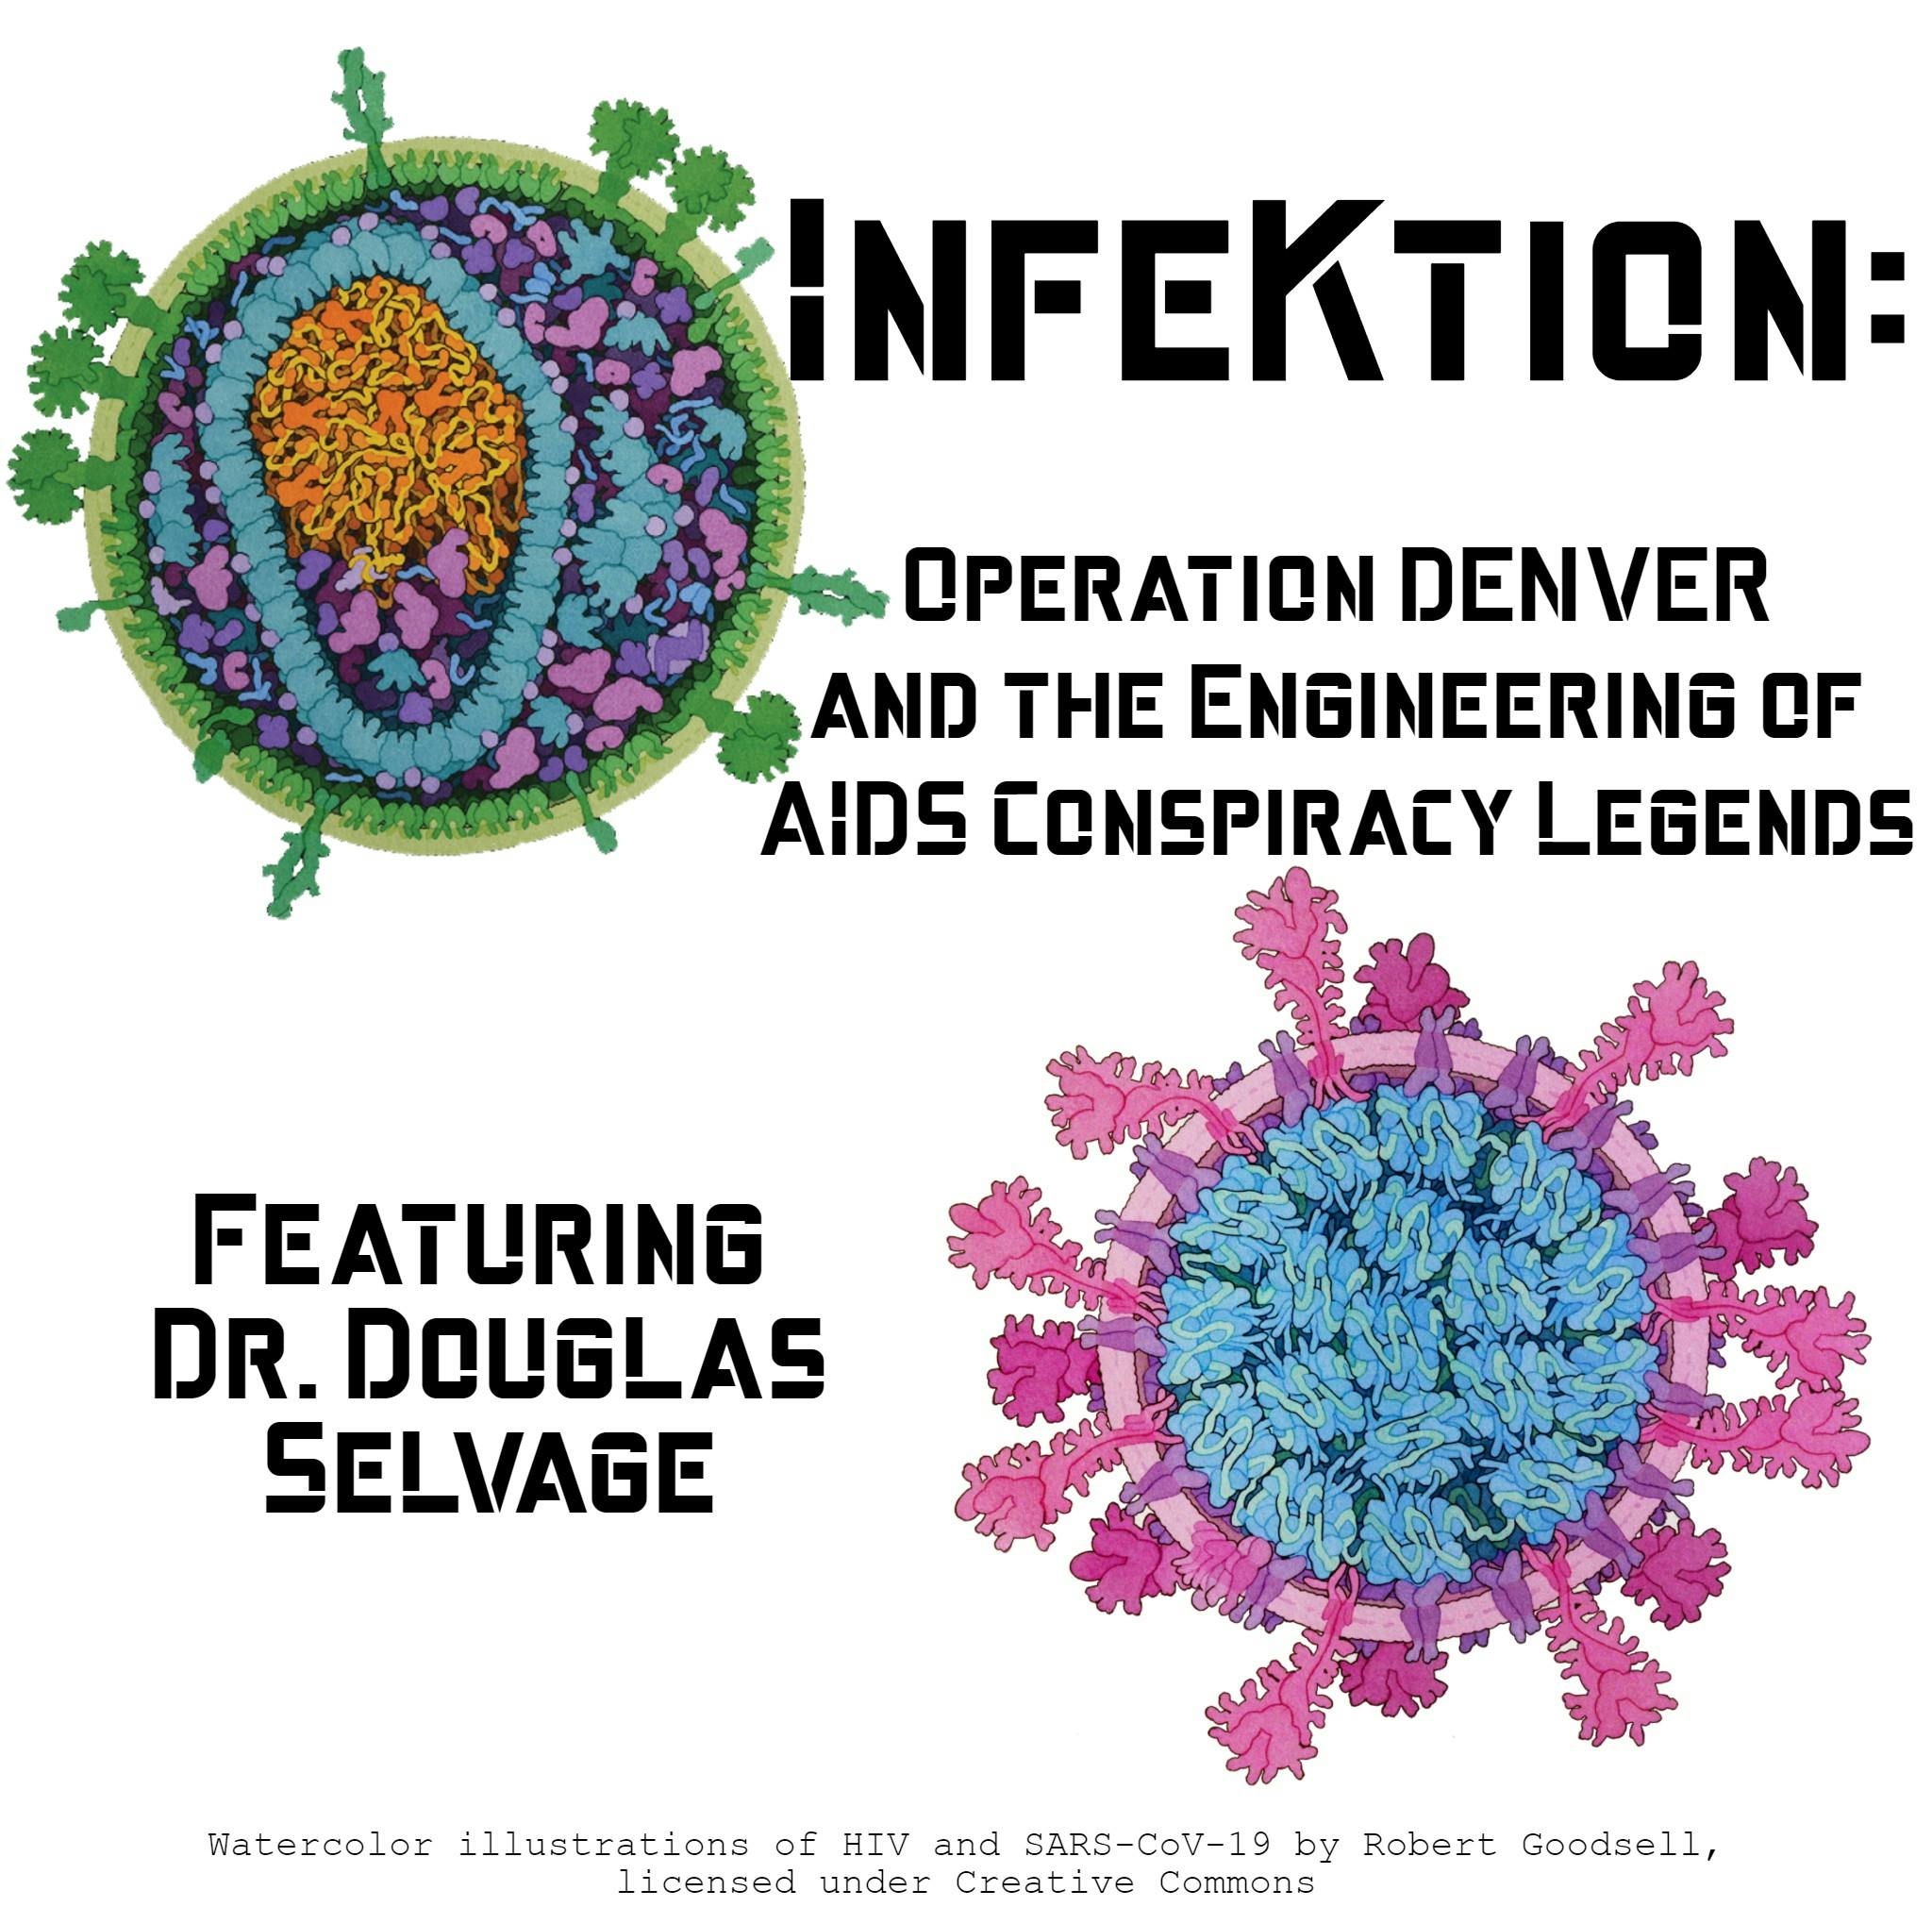 Infektion: Operation DENVER and the Engineering of AIDS Conspiracy Legends (featuring Dr. Douglas Selvage)